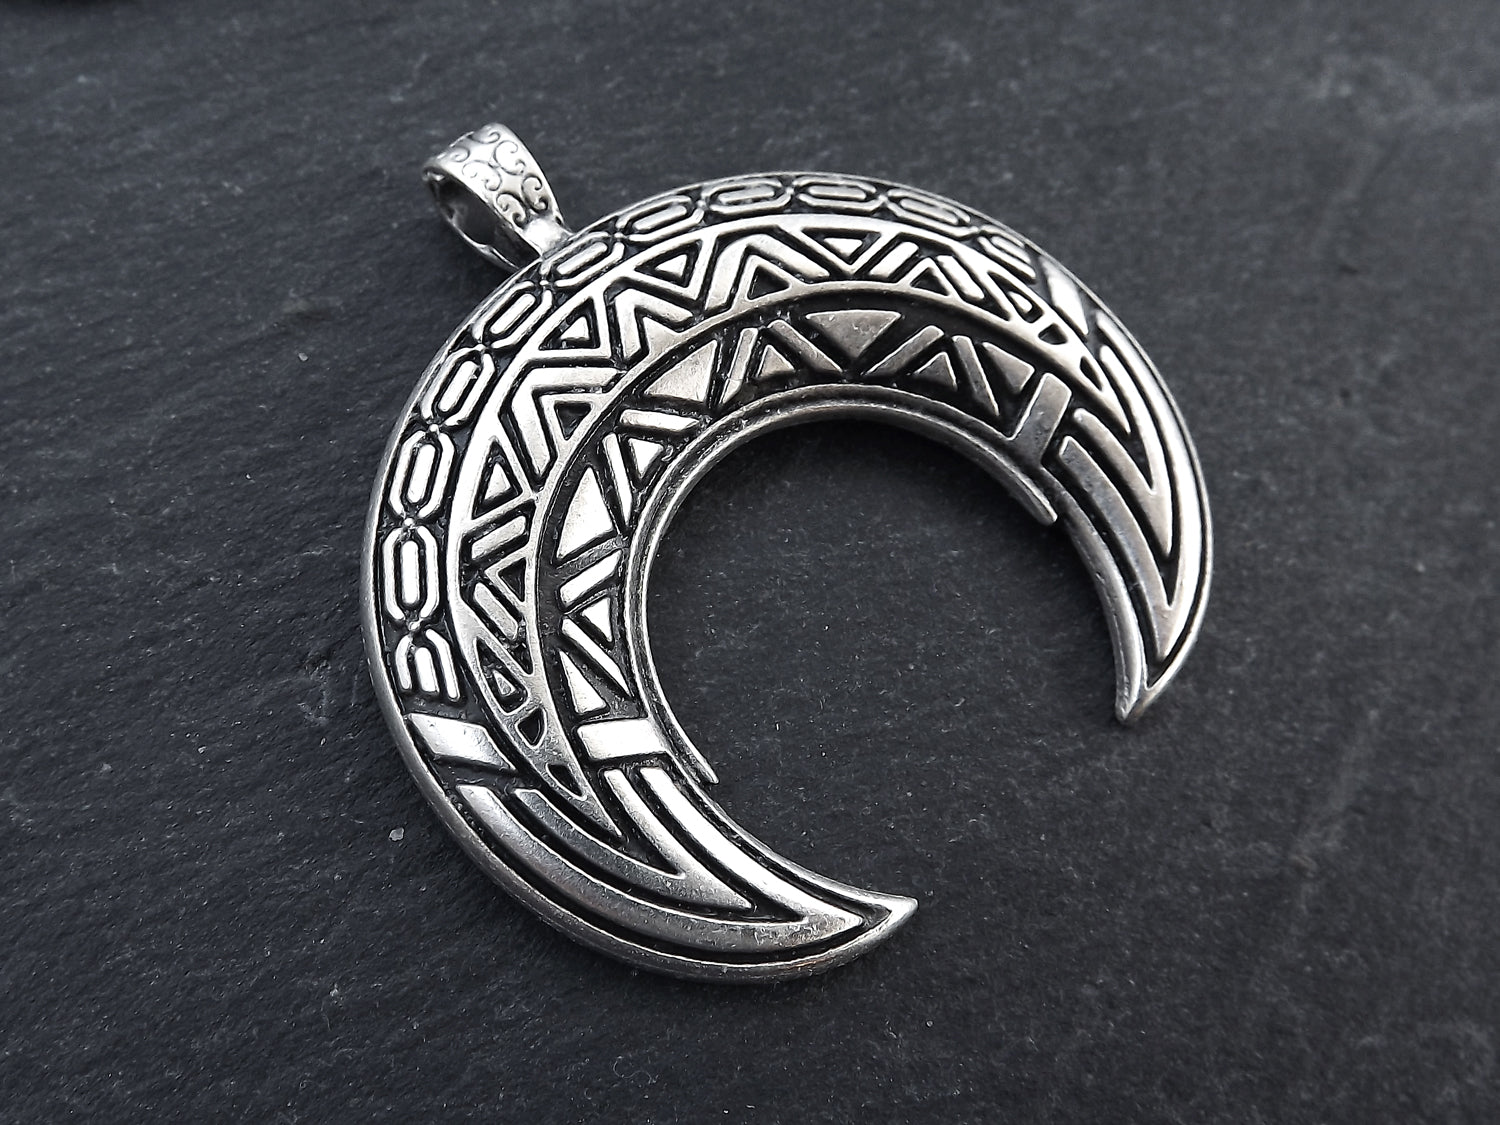 Large Crescent Pendant Tribal Double Horn Moon Detailed Pendant Matte Silver Plated Turkish Jewelry Making Supplies Findings Components 1PC